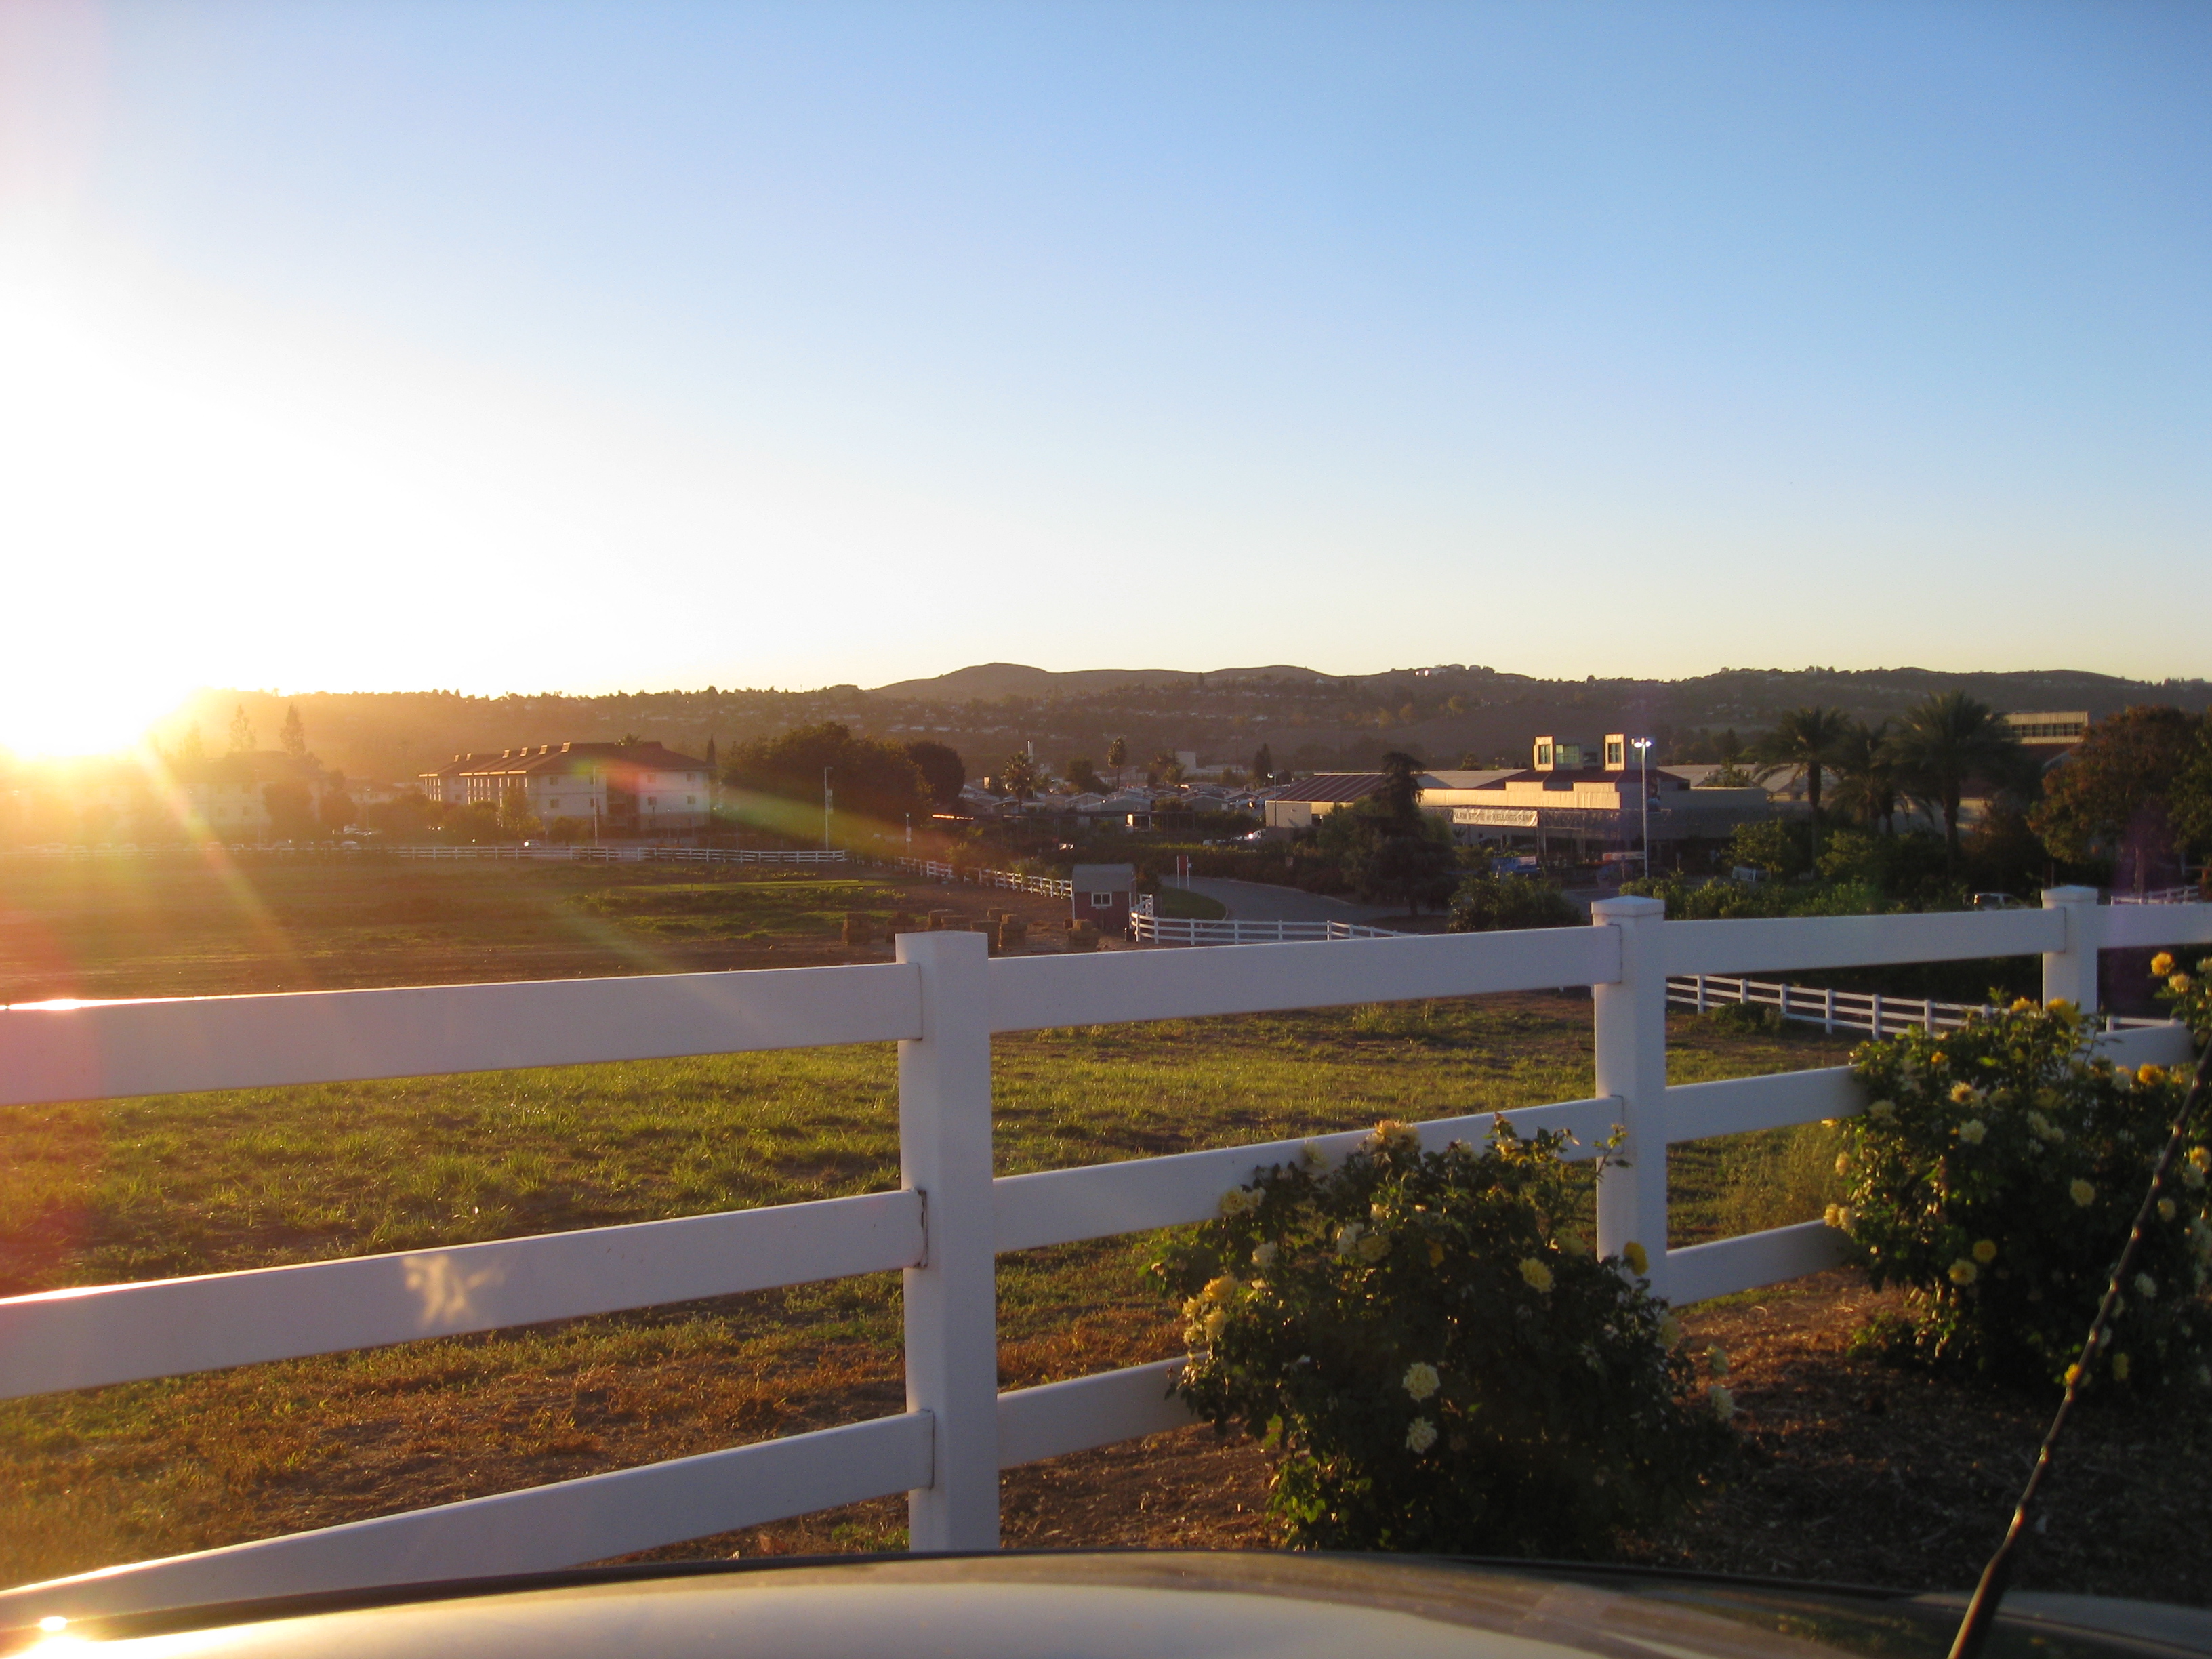 Looking out over Kellogg Ranch, home to pastured animals, fields of veggies, and scores of classes.